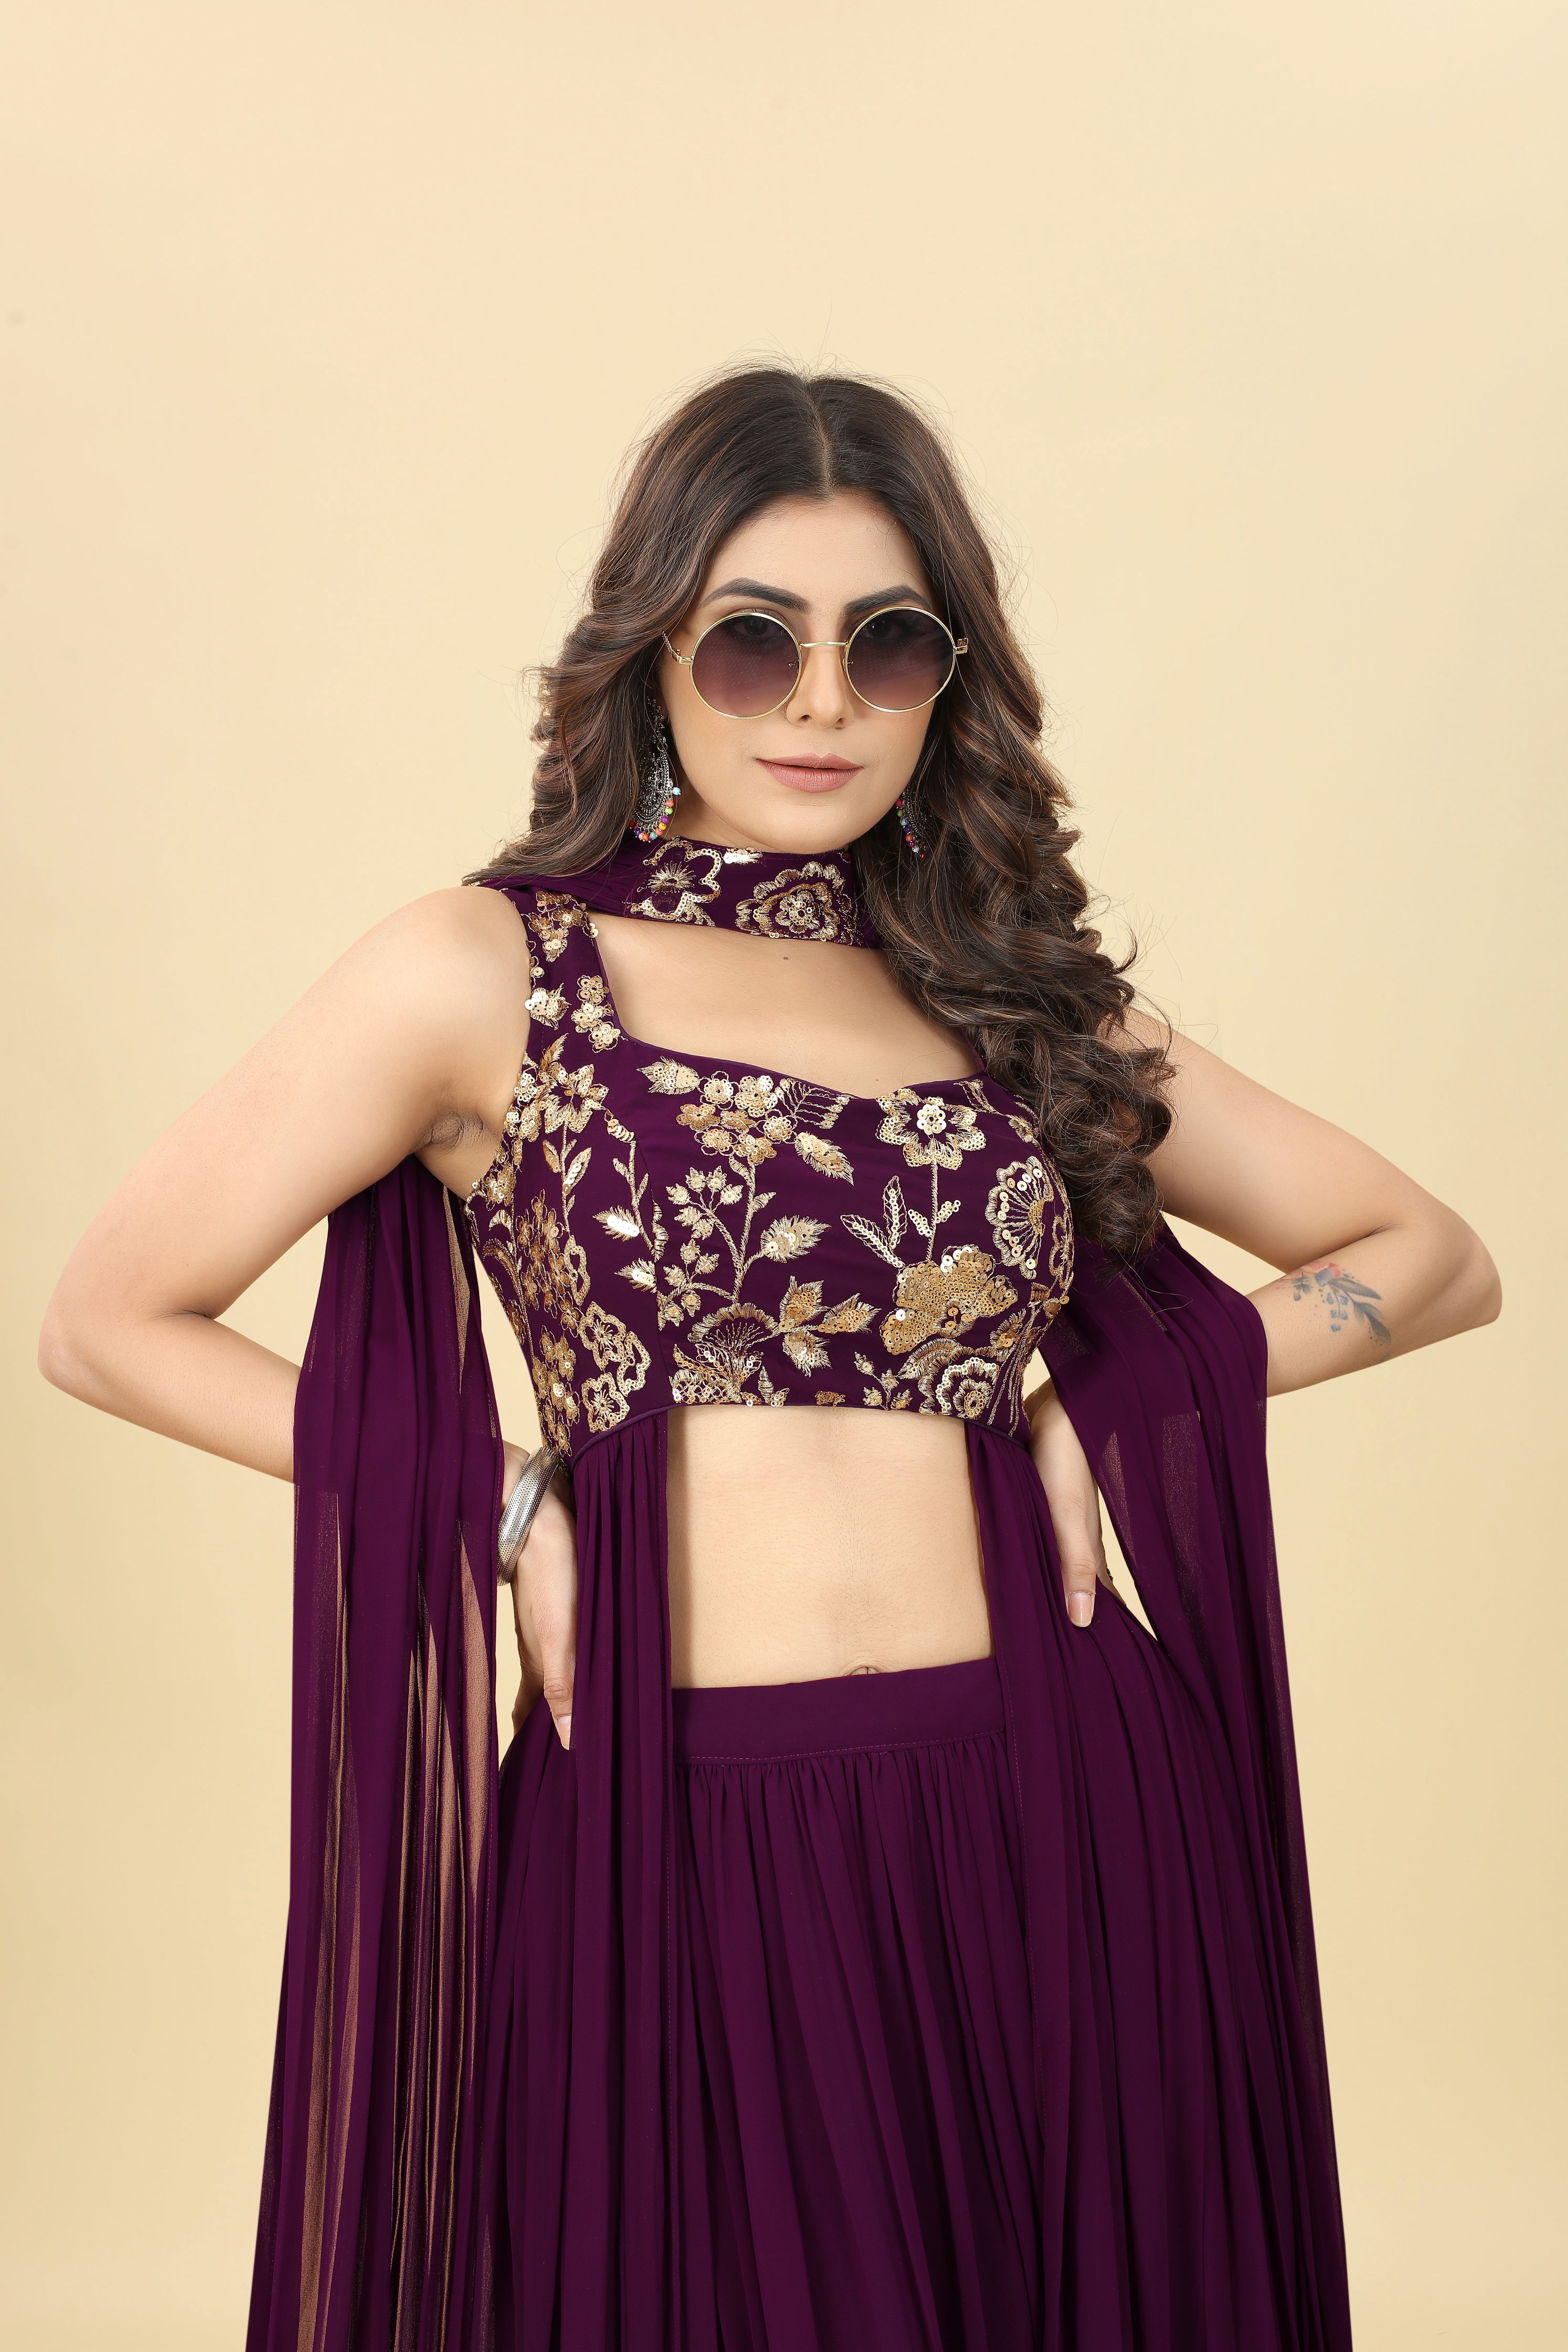 Primefair Women's Embroidery Sleeveless Design Phantom Readymade Blouse For  Saree And Lehenga Choli at Rs 316/piece | Embroidered Blouses in Surat |  ID: 25906599248